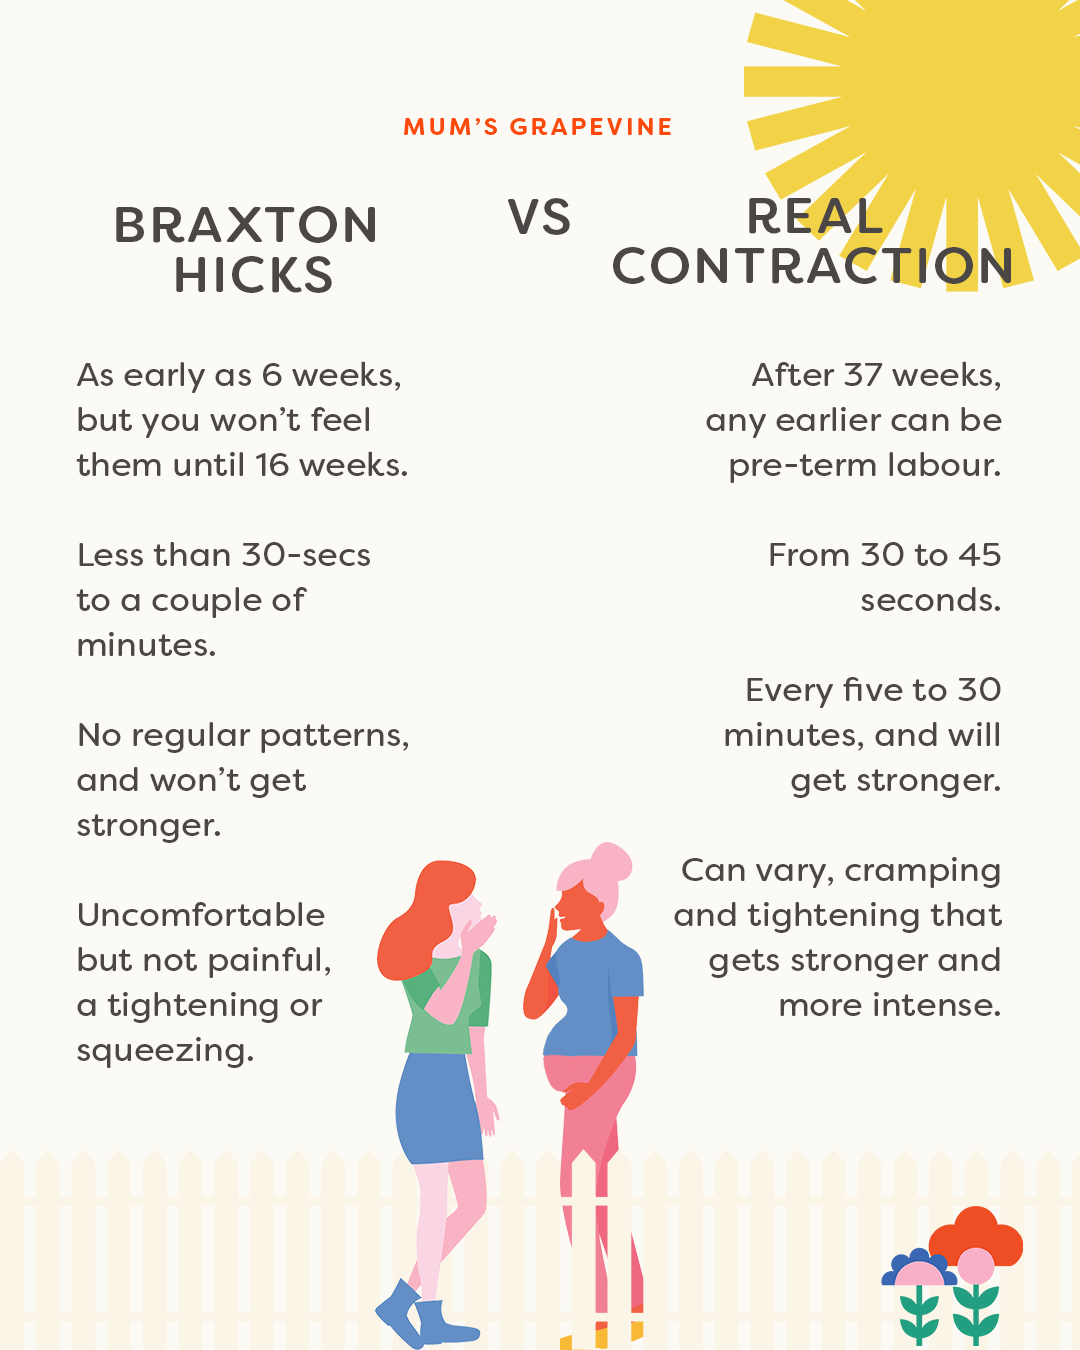 Comparison Table showing the differences between a braxton hick and a real contraction